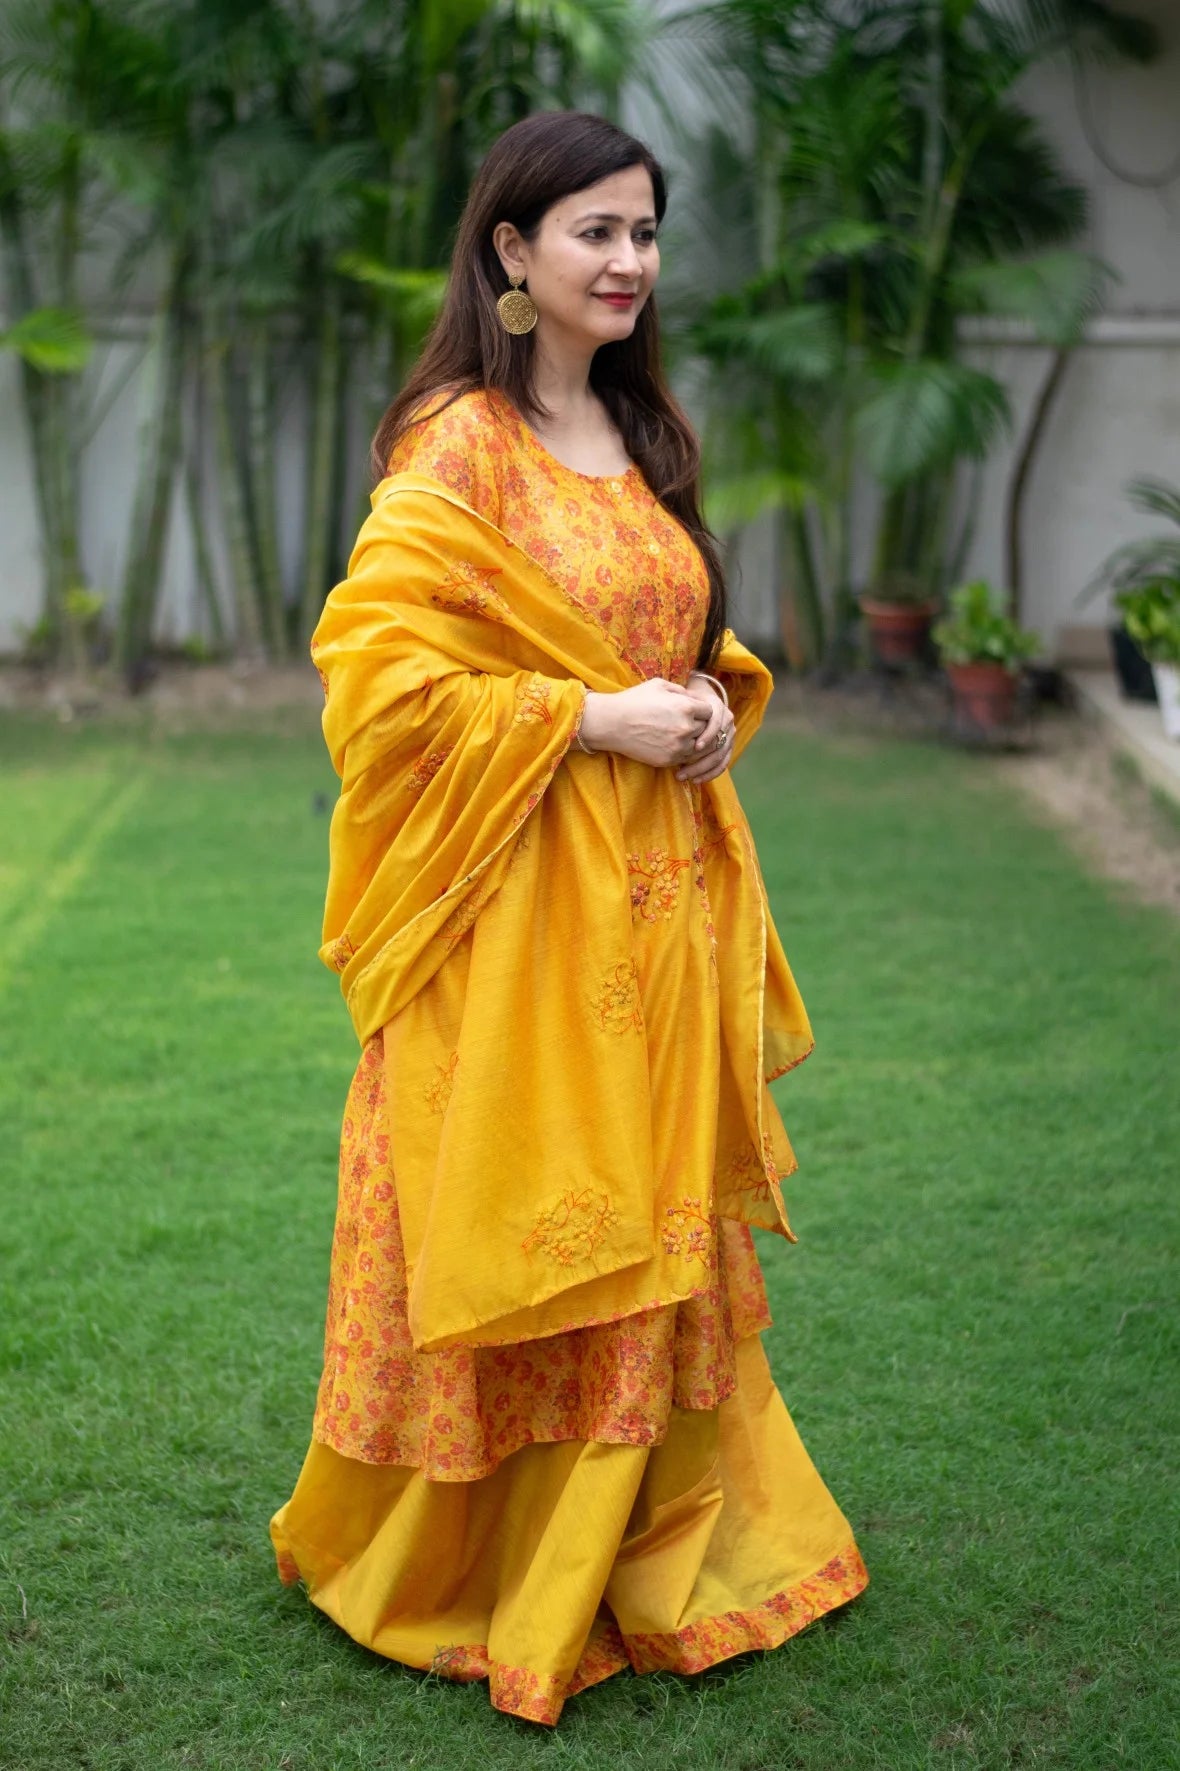 Stunning Chanderi Kurta in bright yellow complements the woman's grace.